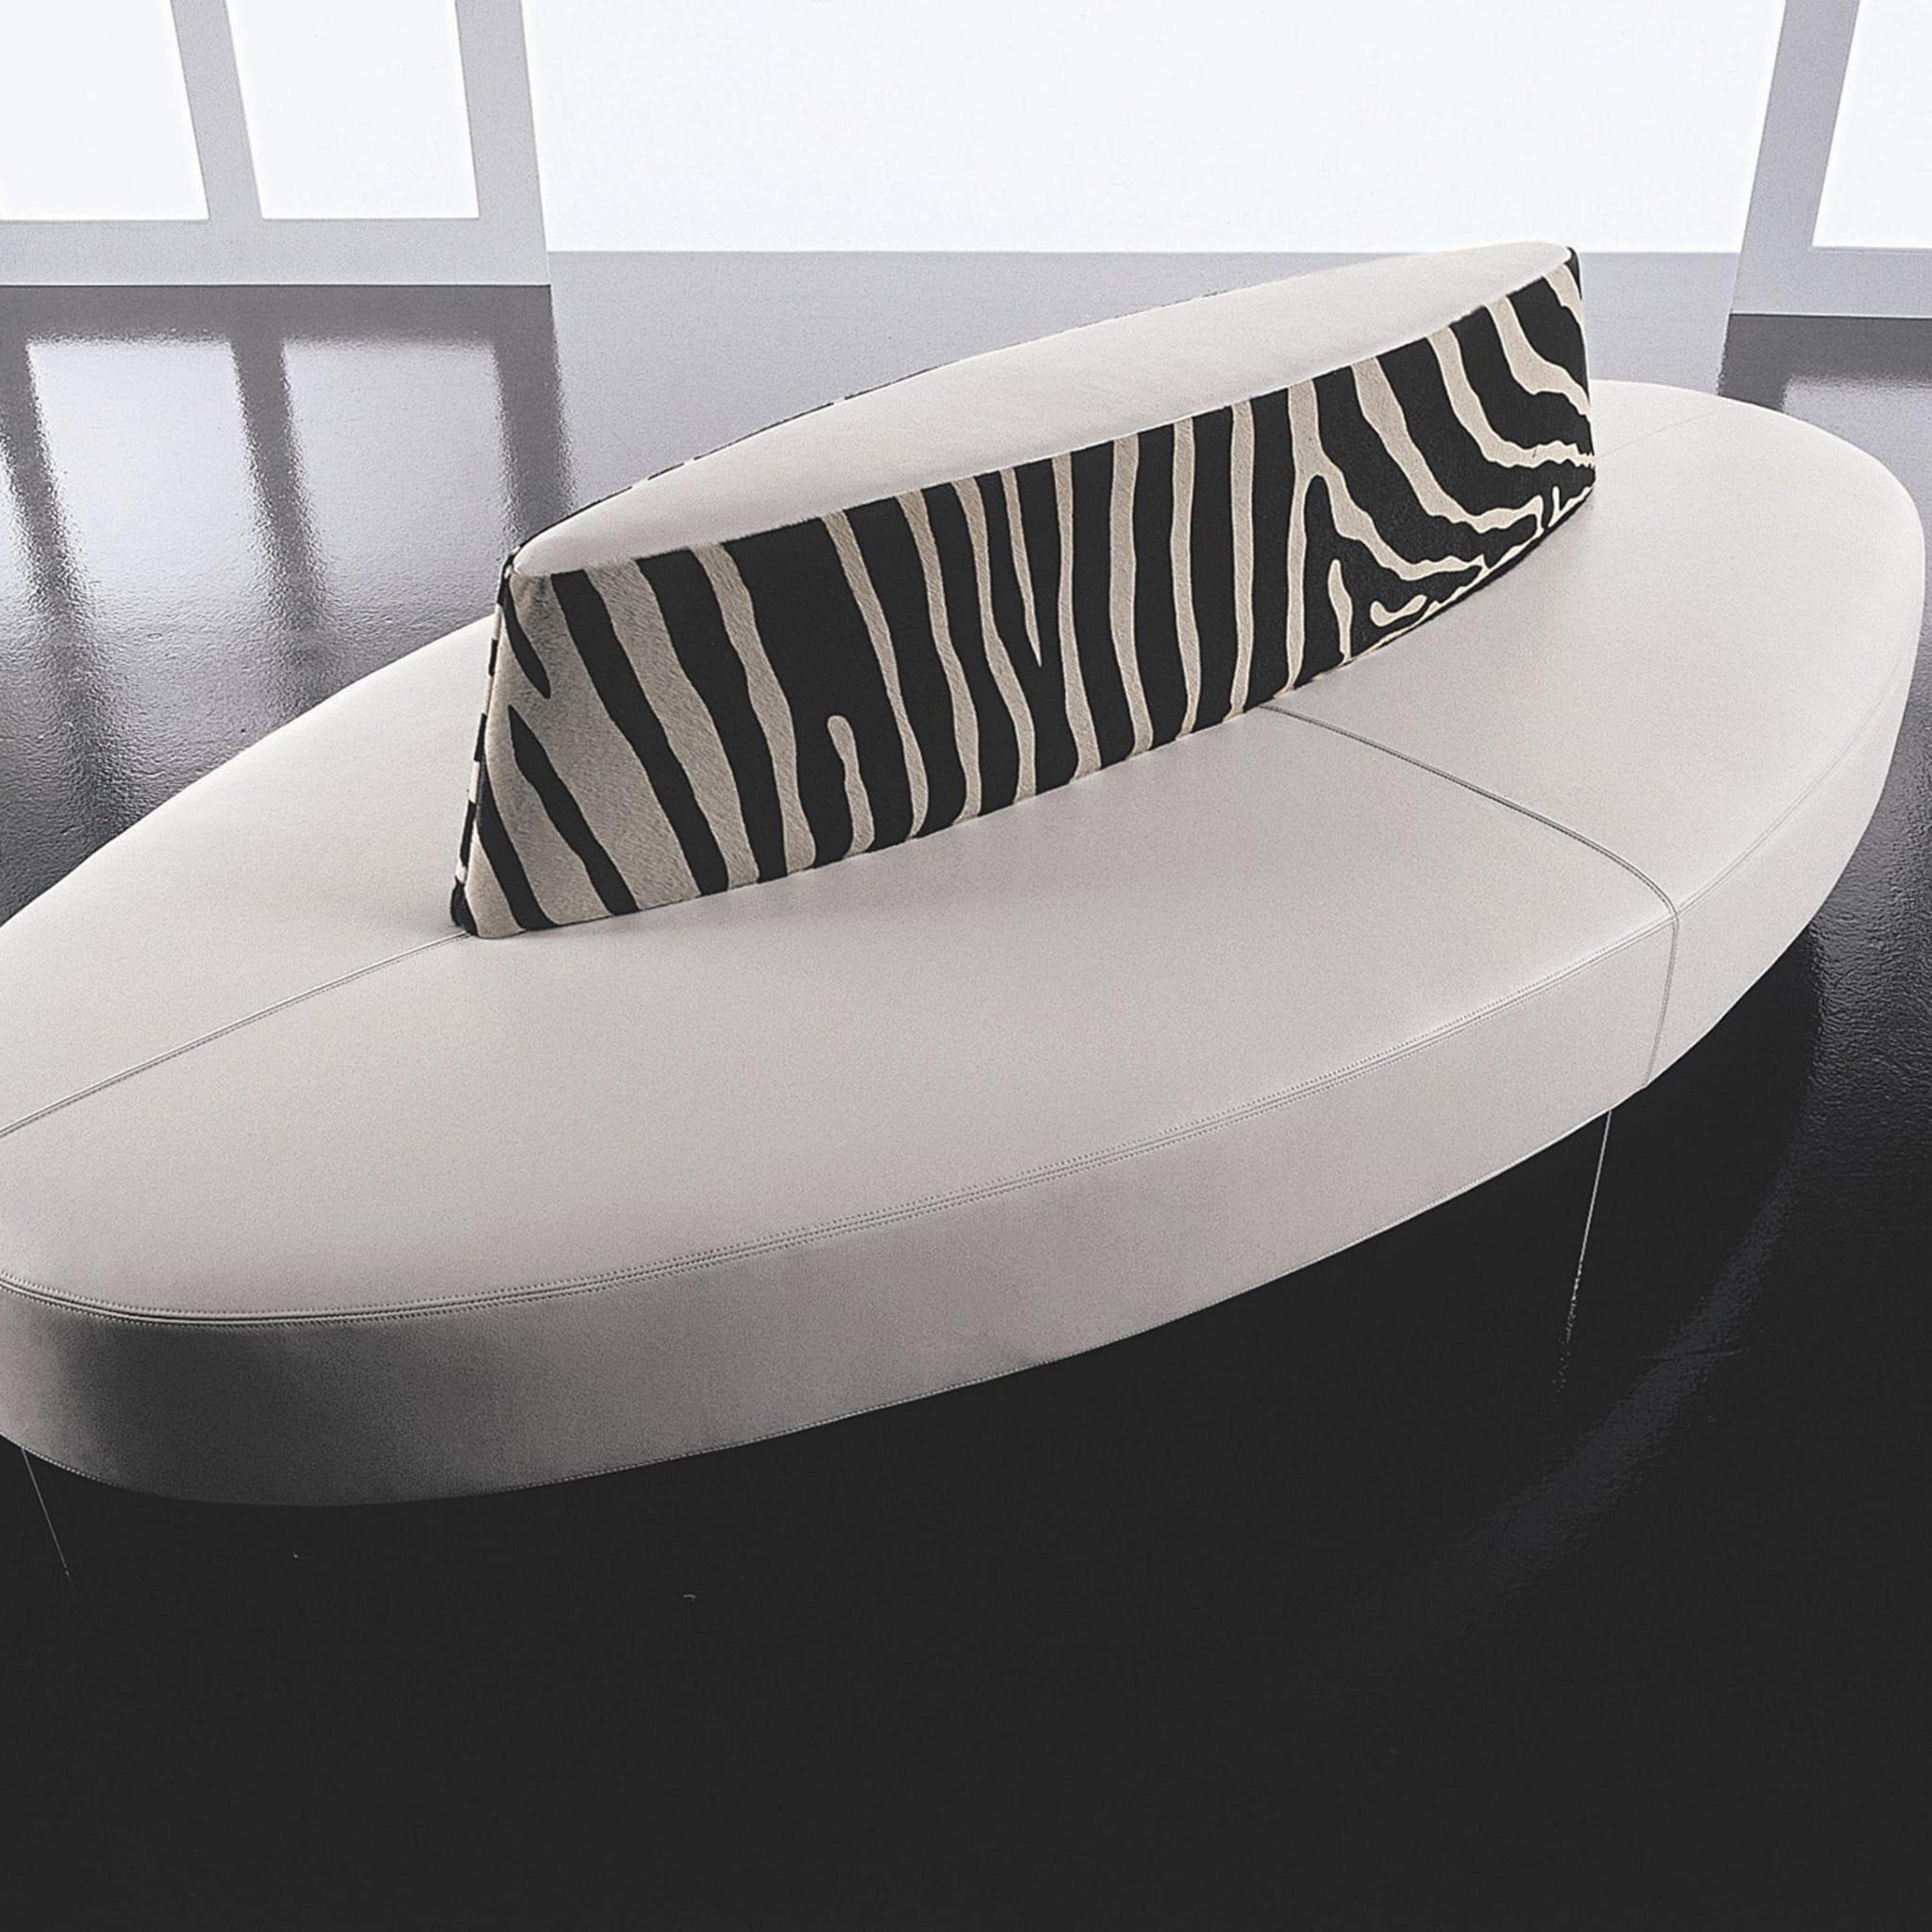 Reminiscent of the pop-art styles of the 1960s, this sleek, modern, elliptical-shaped sofa features stainless steel legs and a supporting frame in beech plywood. Its padded seat is covered in white, genuine leather, while zebra-striped, pony-hair